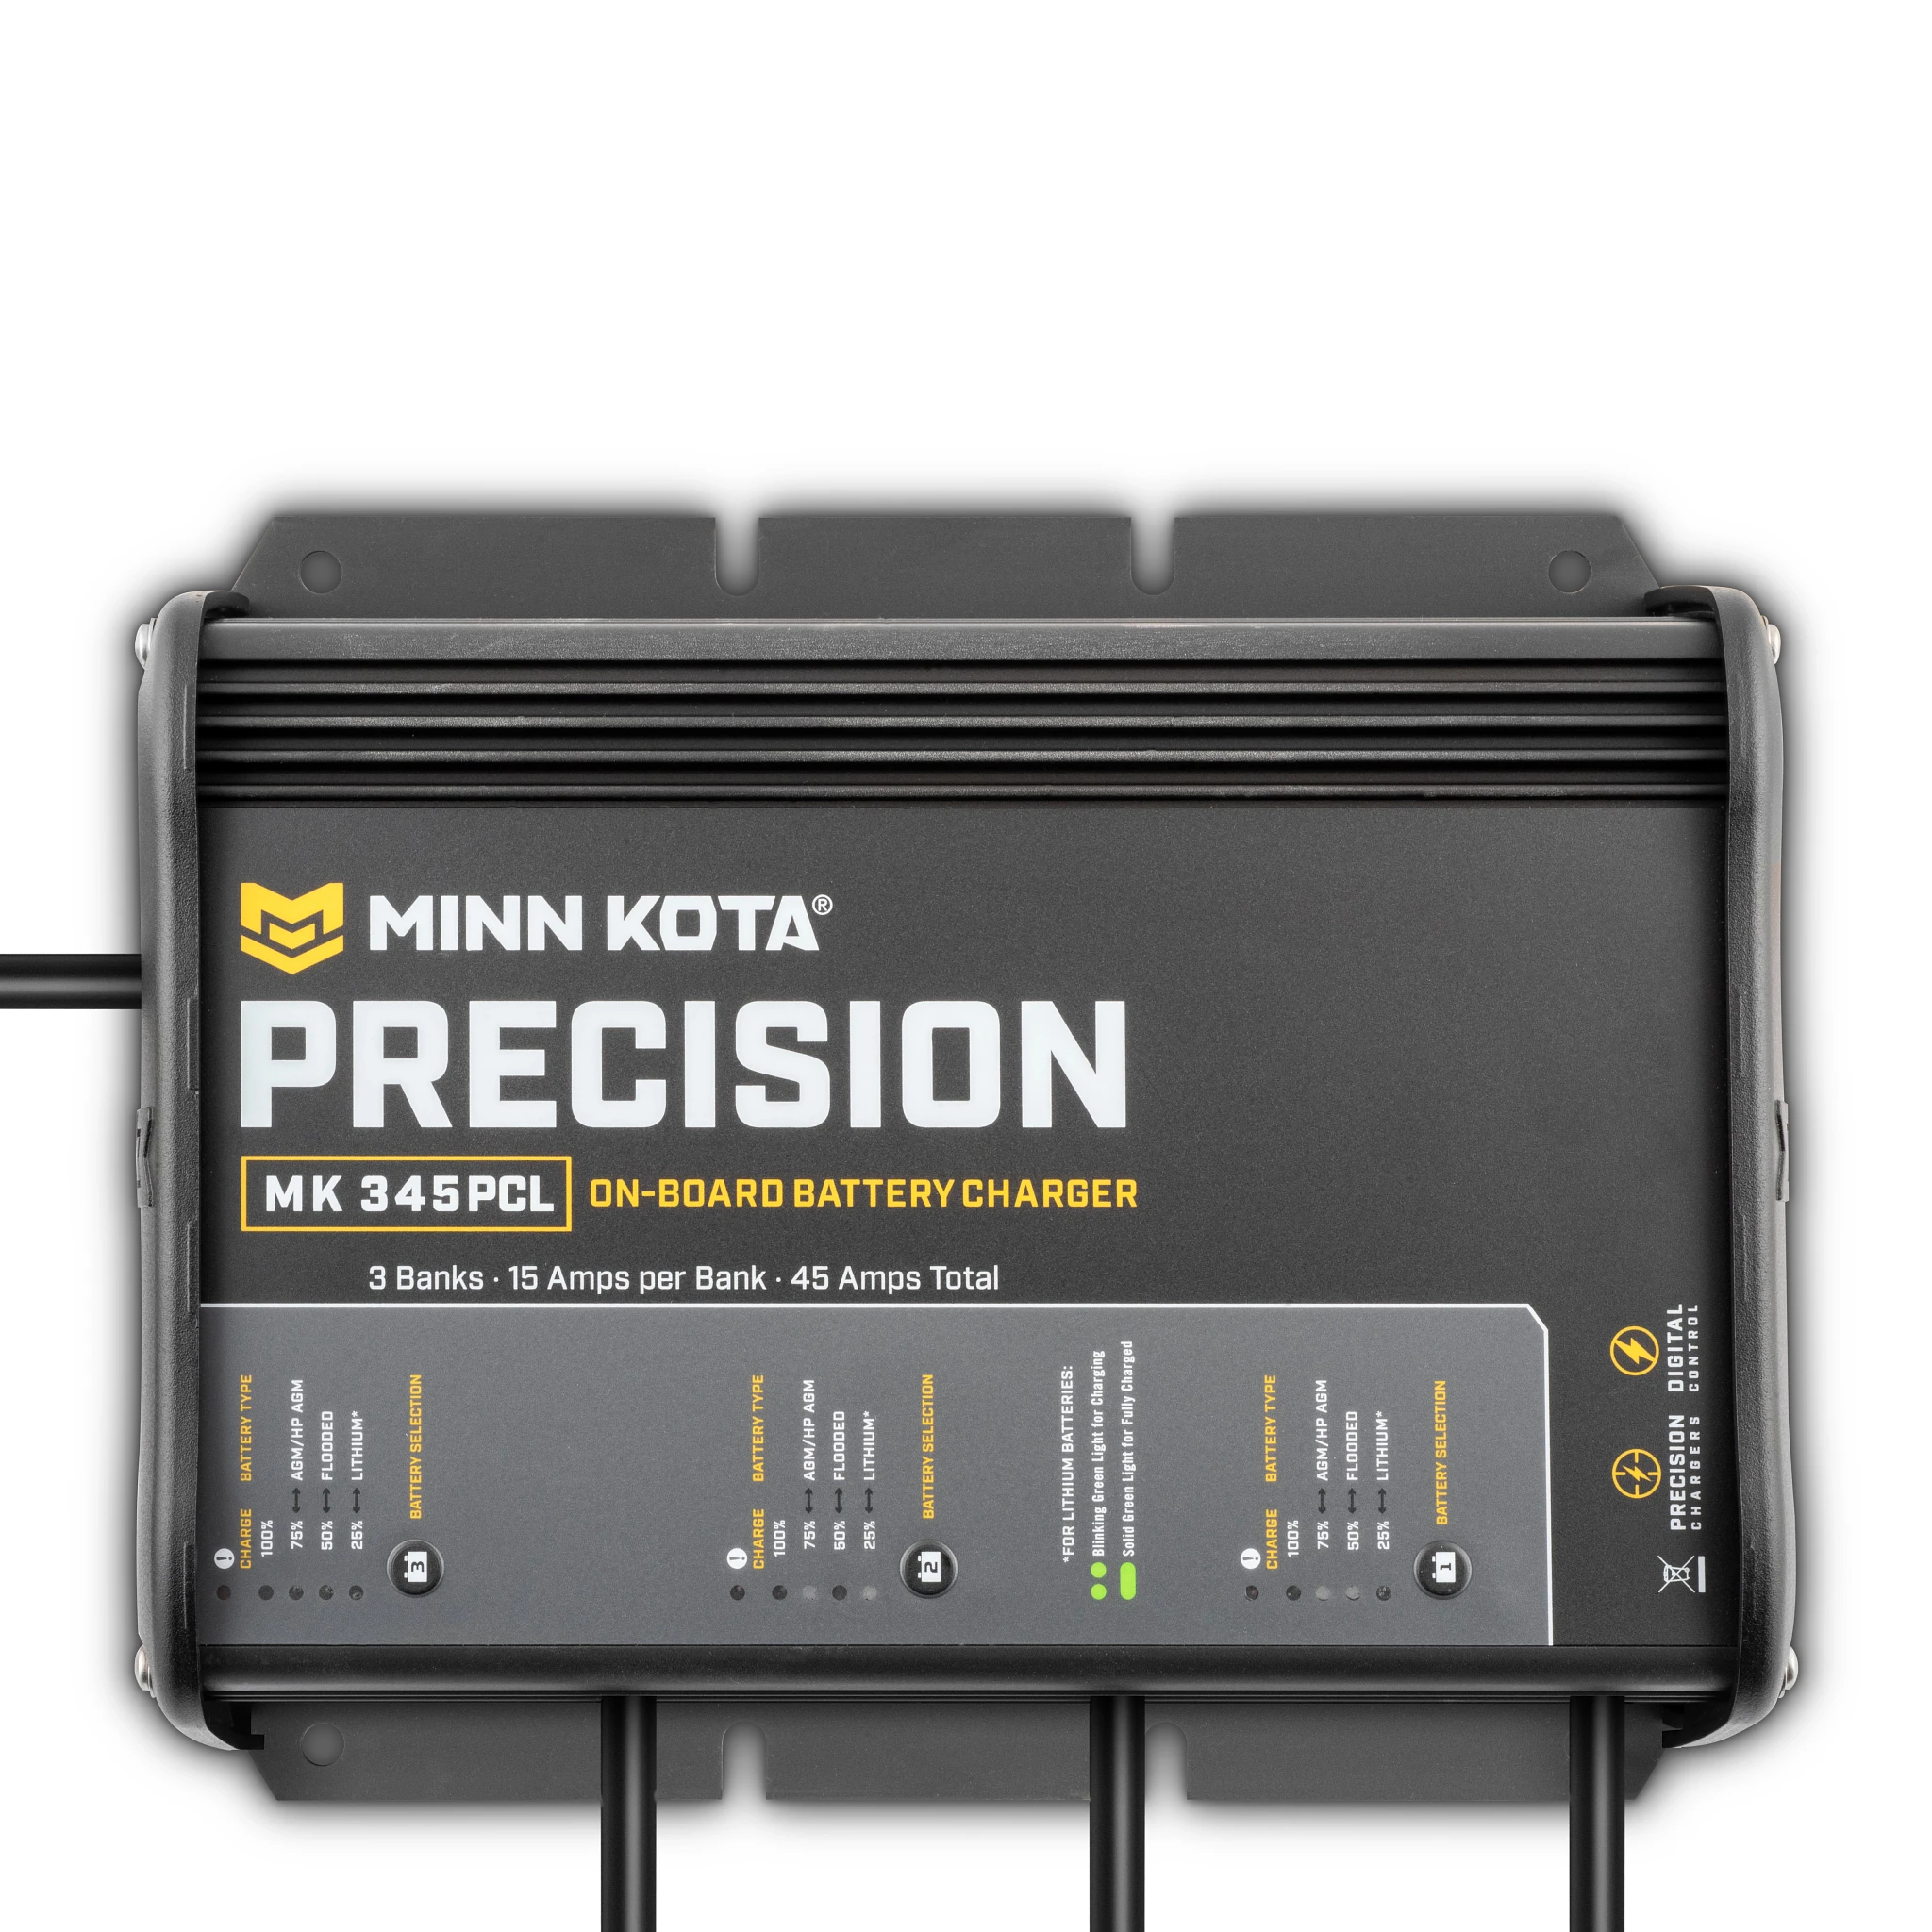 Precision On-Board MK 345 PCL Battery Charger top view